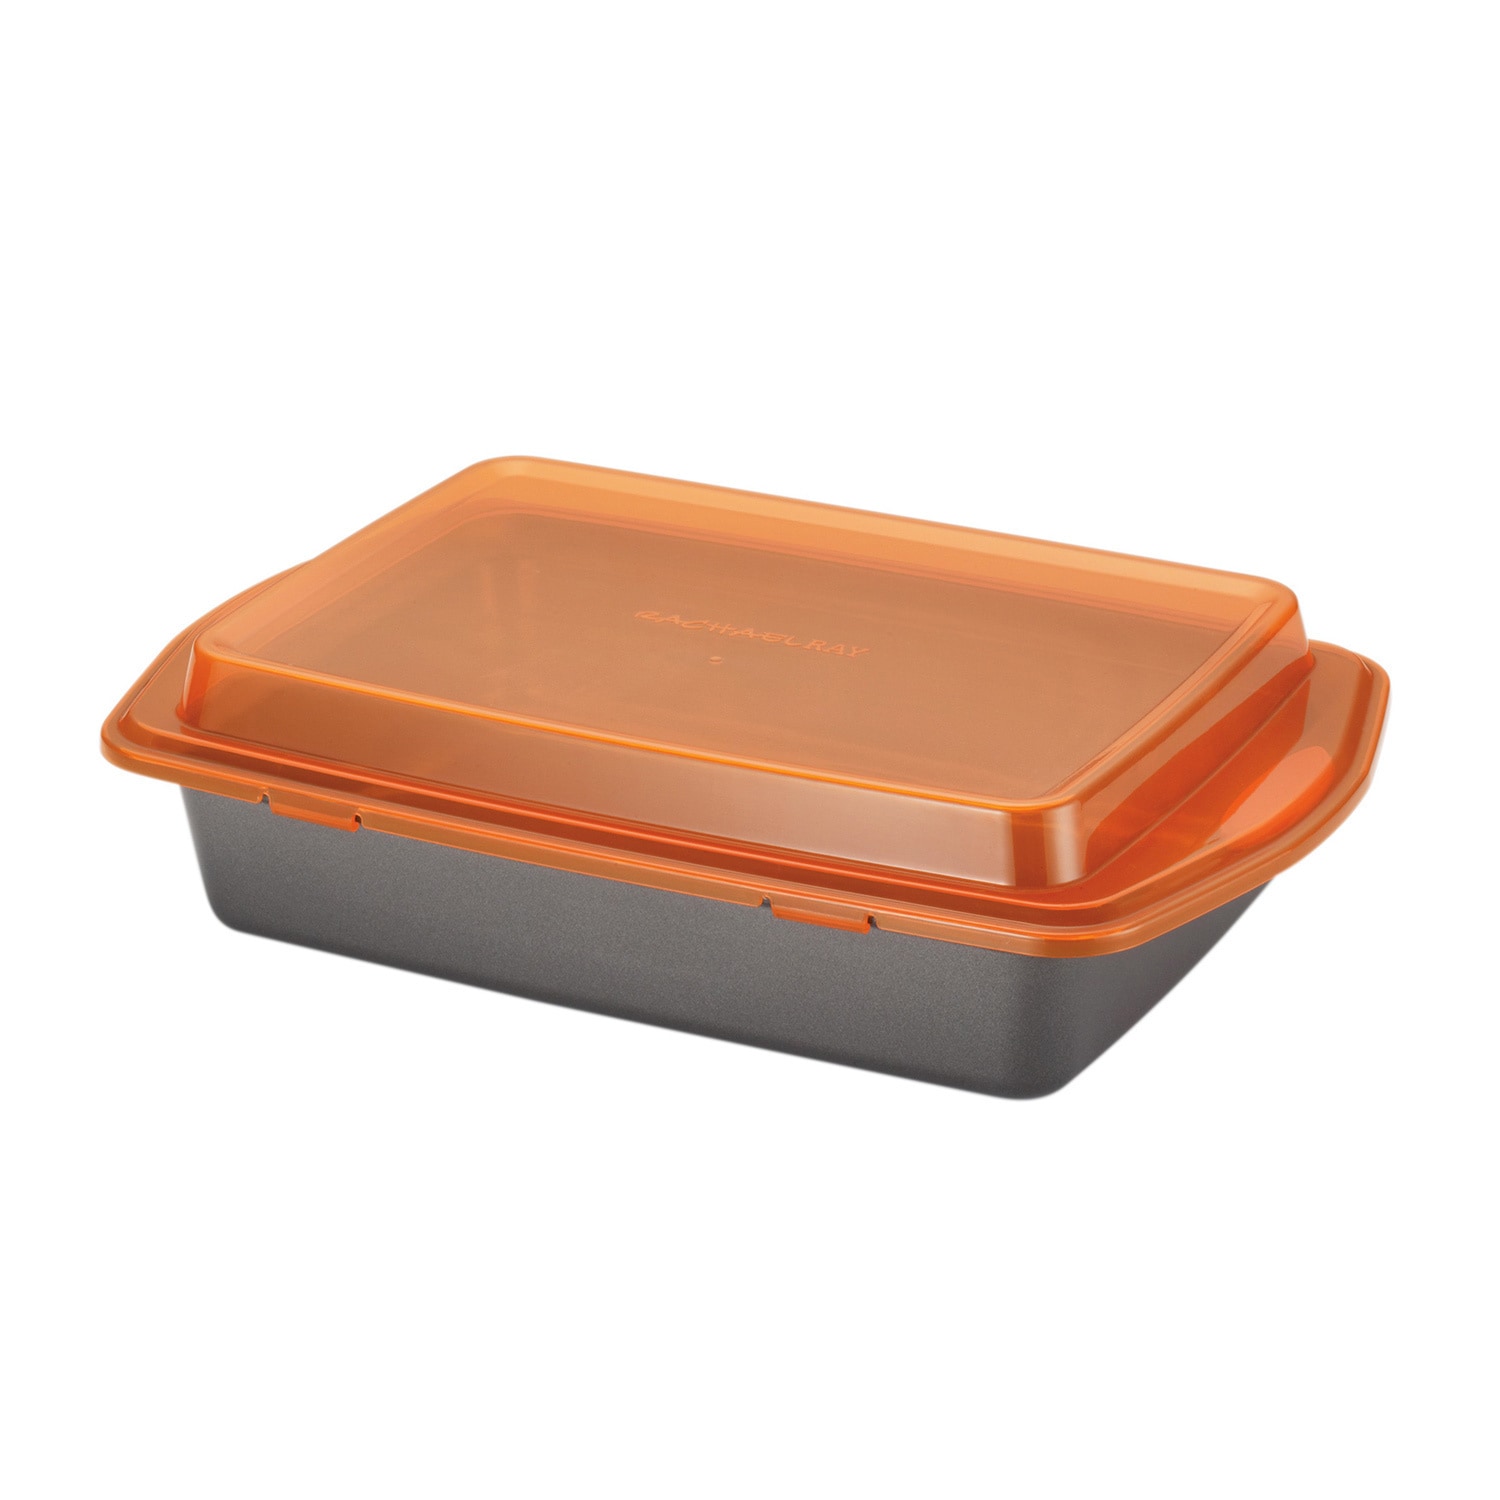 Rachael Ray Nonstick Bakeware with Grips, Nonstick Cookie Sheet / Baking  Sheet - 11 Inch x 17 Inch, Gray with Orange Grips